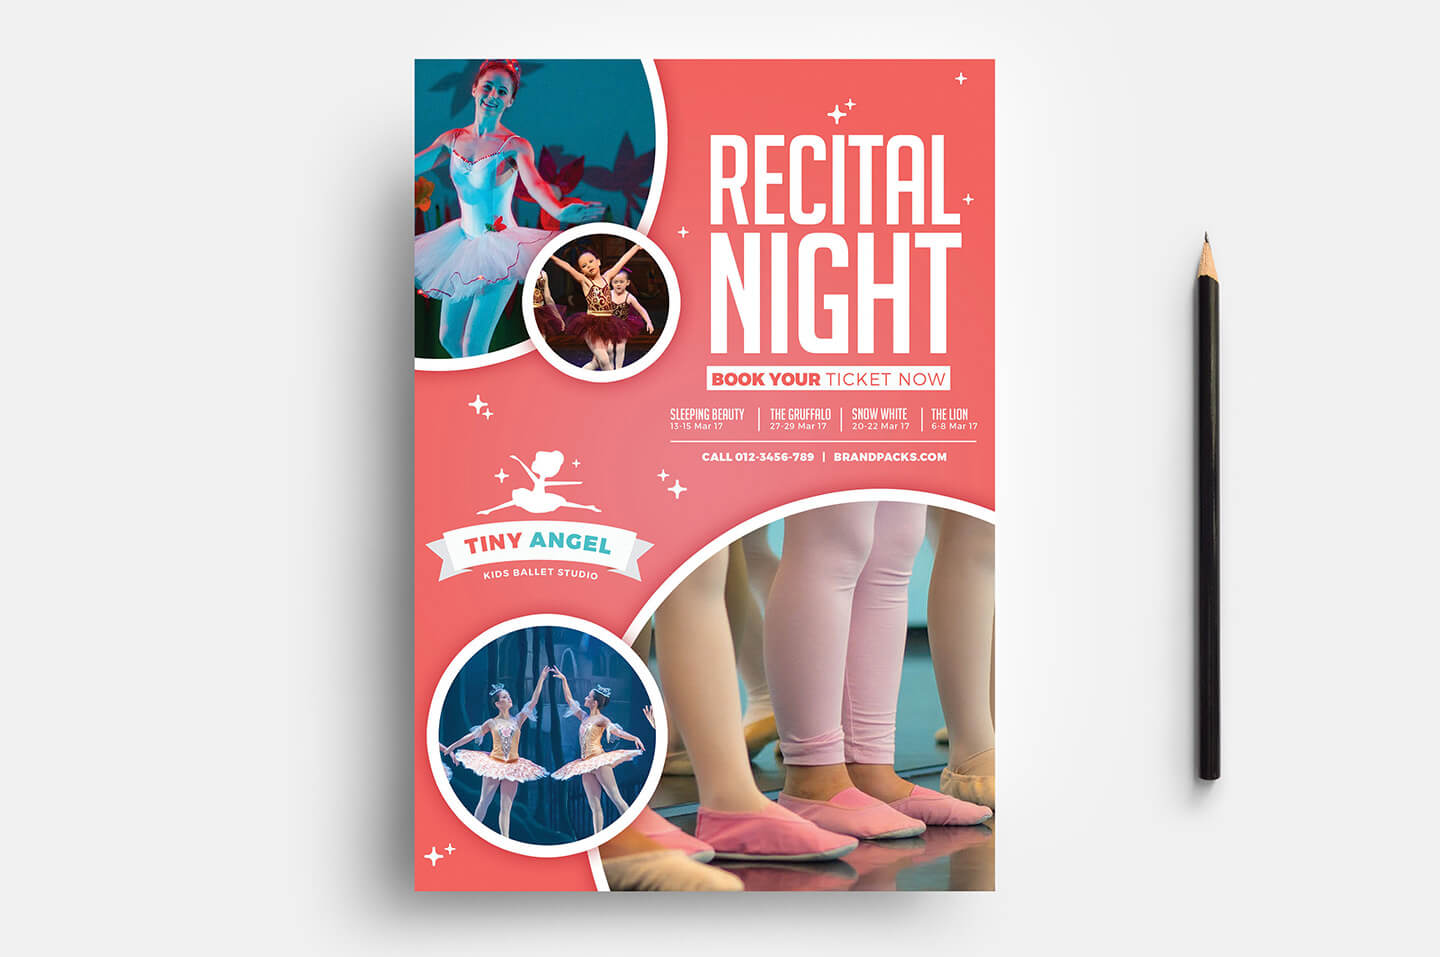 Free Kid's Ballet Templates For Photoshop & Illustrator Throughout Benefit Dance Flyer Templates